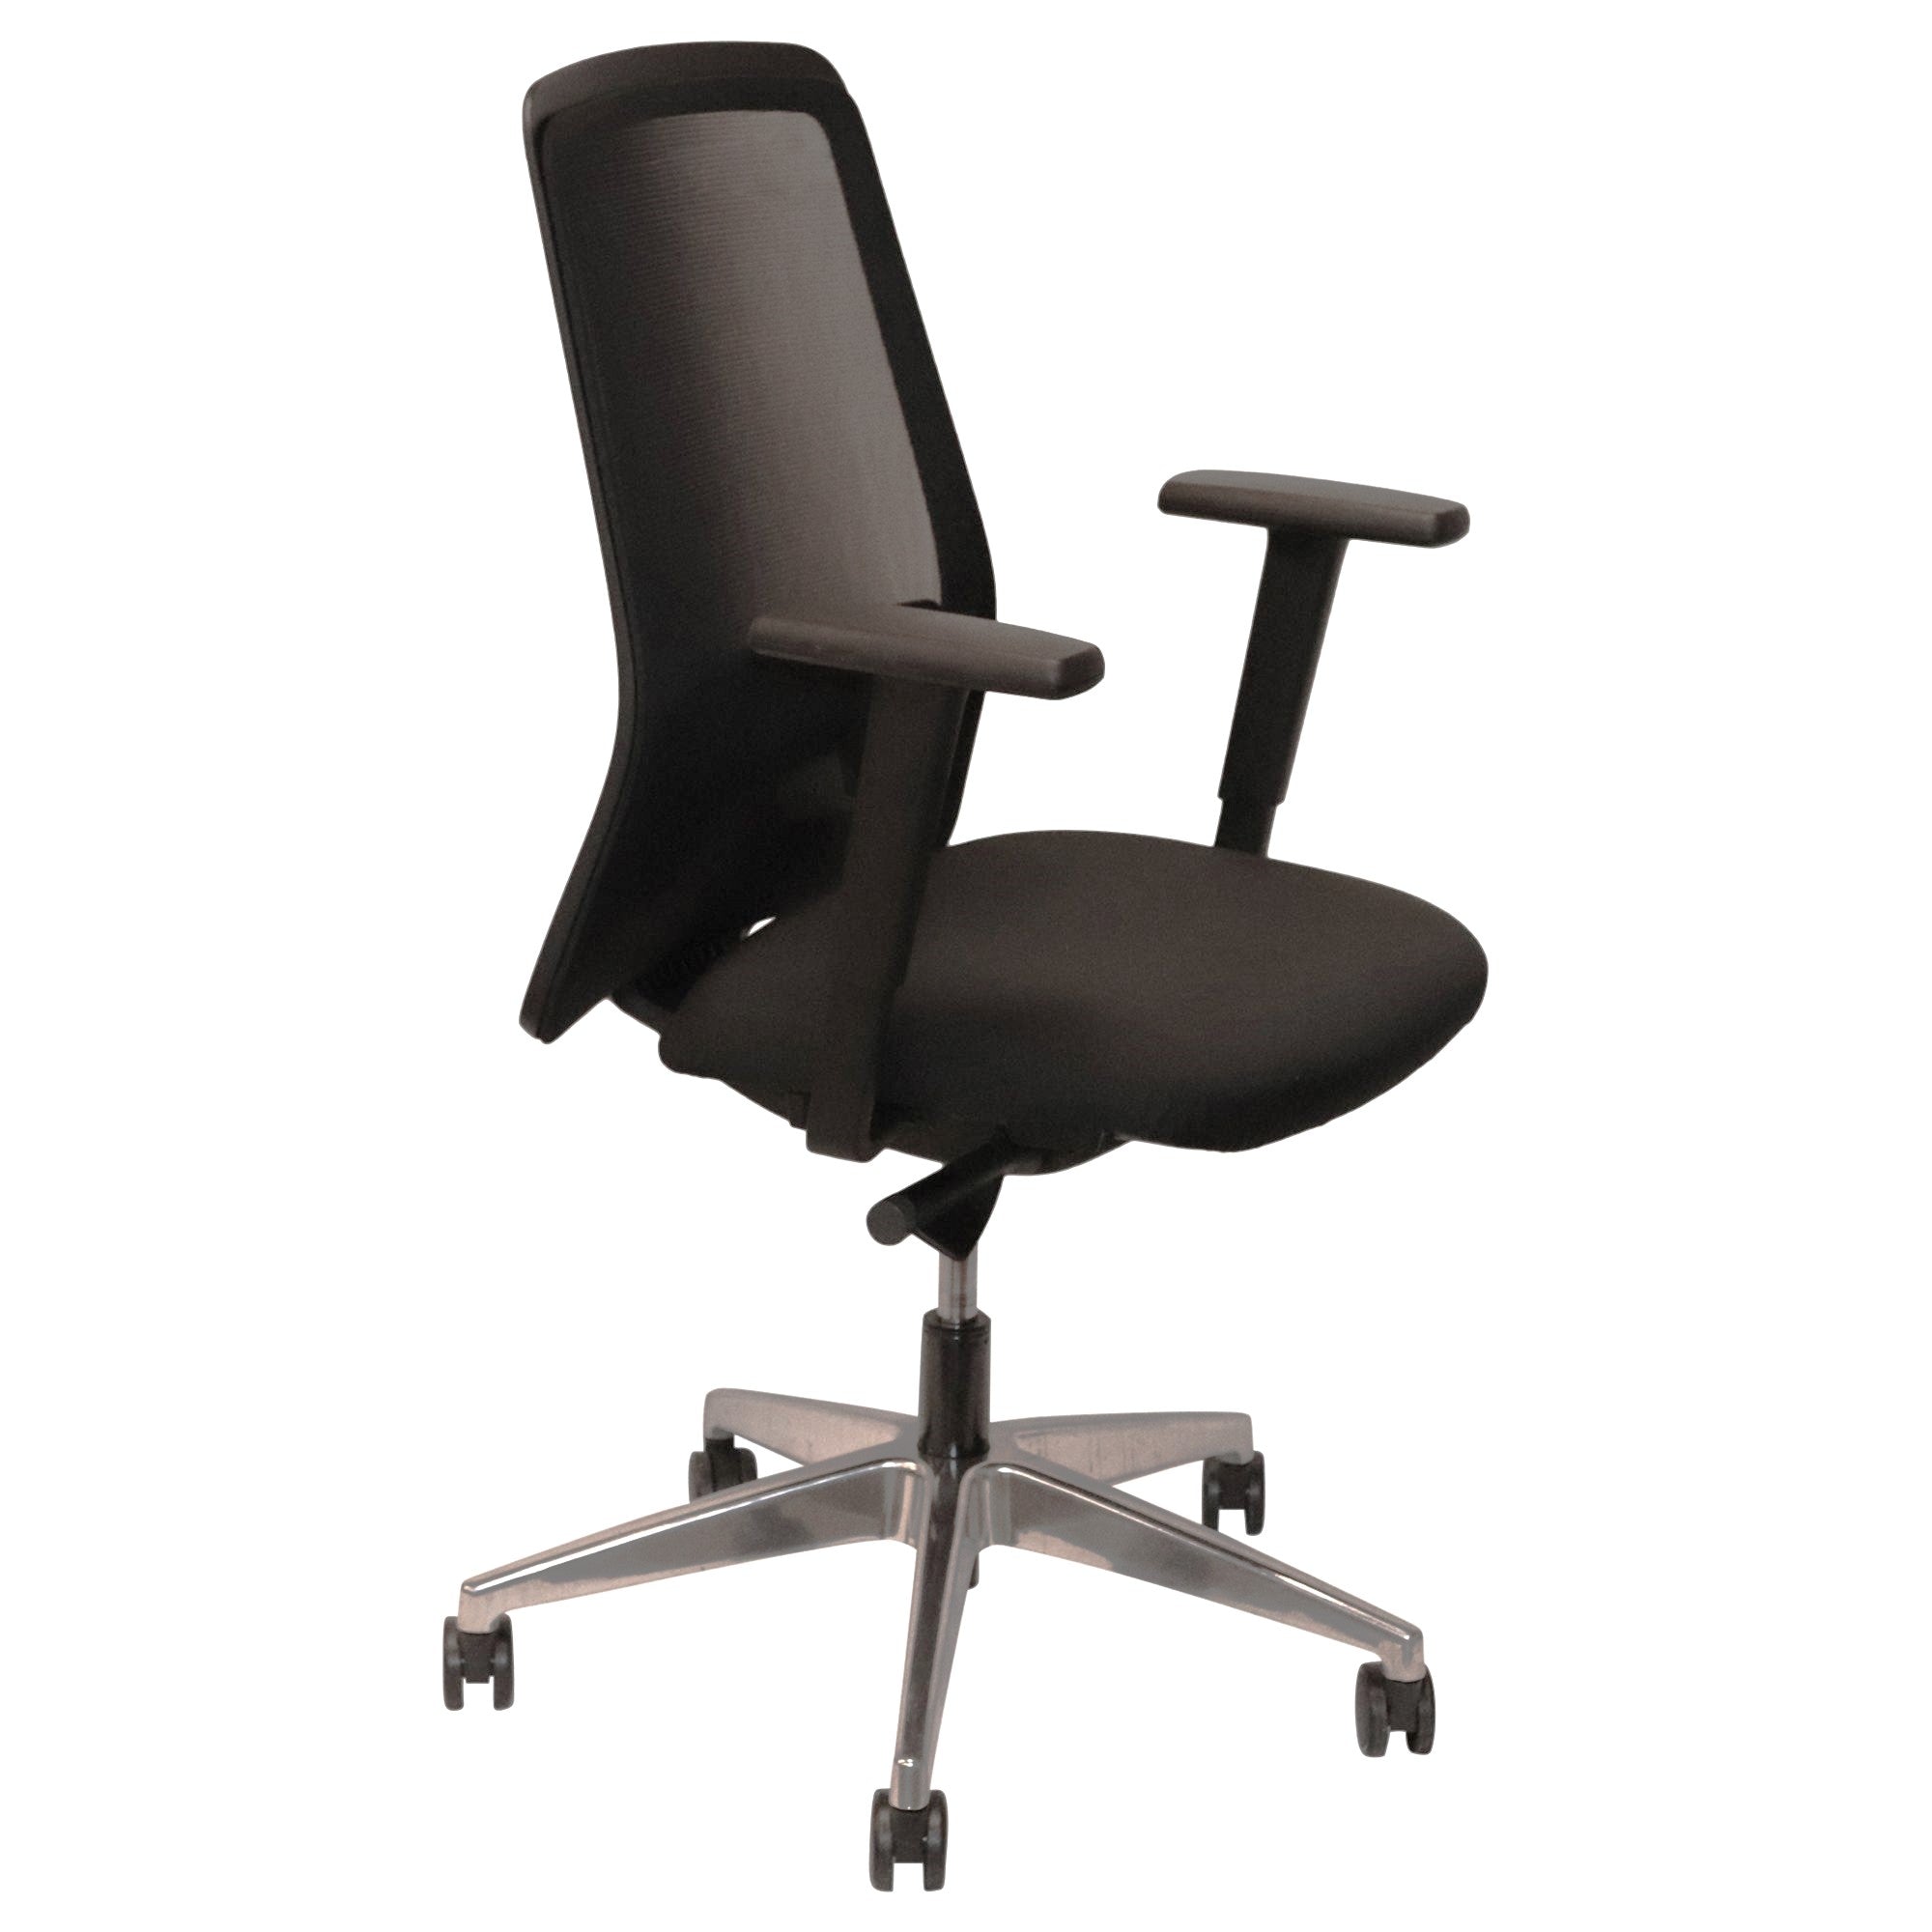 Interstuhl Every Task Chair, Black with Chrome Base - Preowned